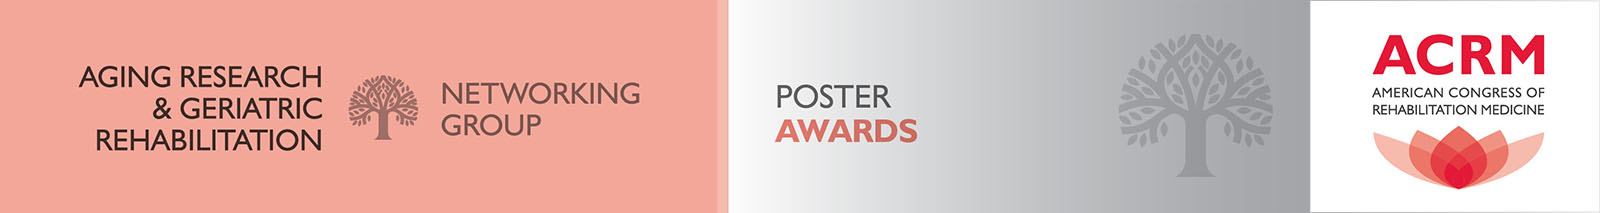 Aging Research and Geriatric Rehabilitation: Poster Awards